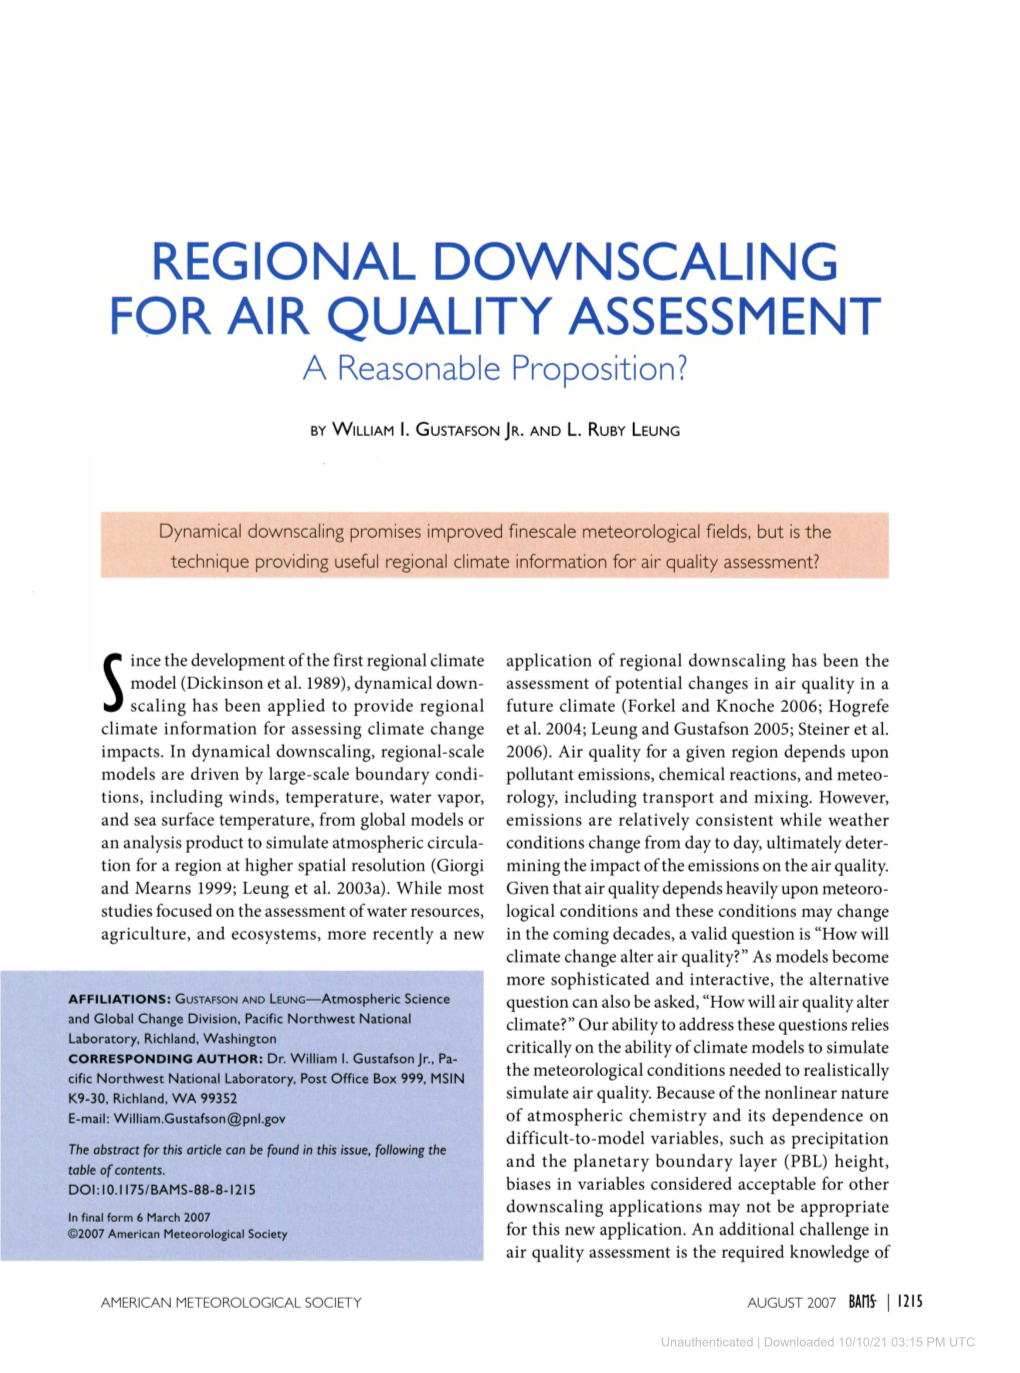 REGIONAL DOWNSCALING for AIR QUALITY ASSESSMENT a Reasonable Proposition?